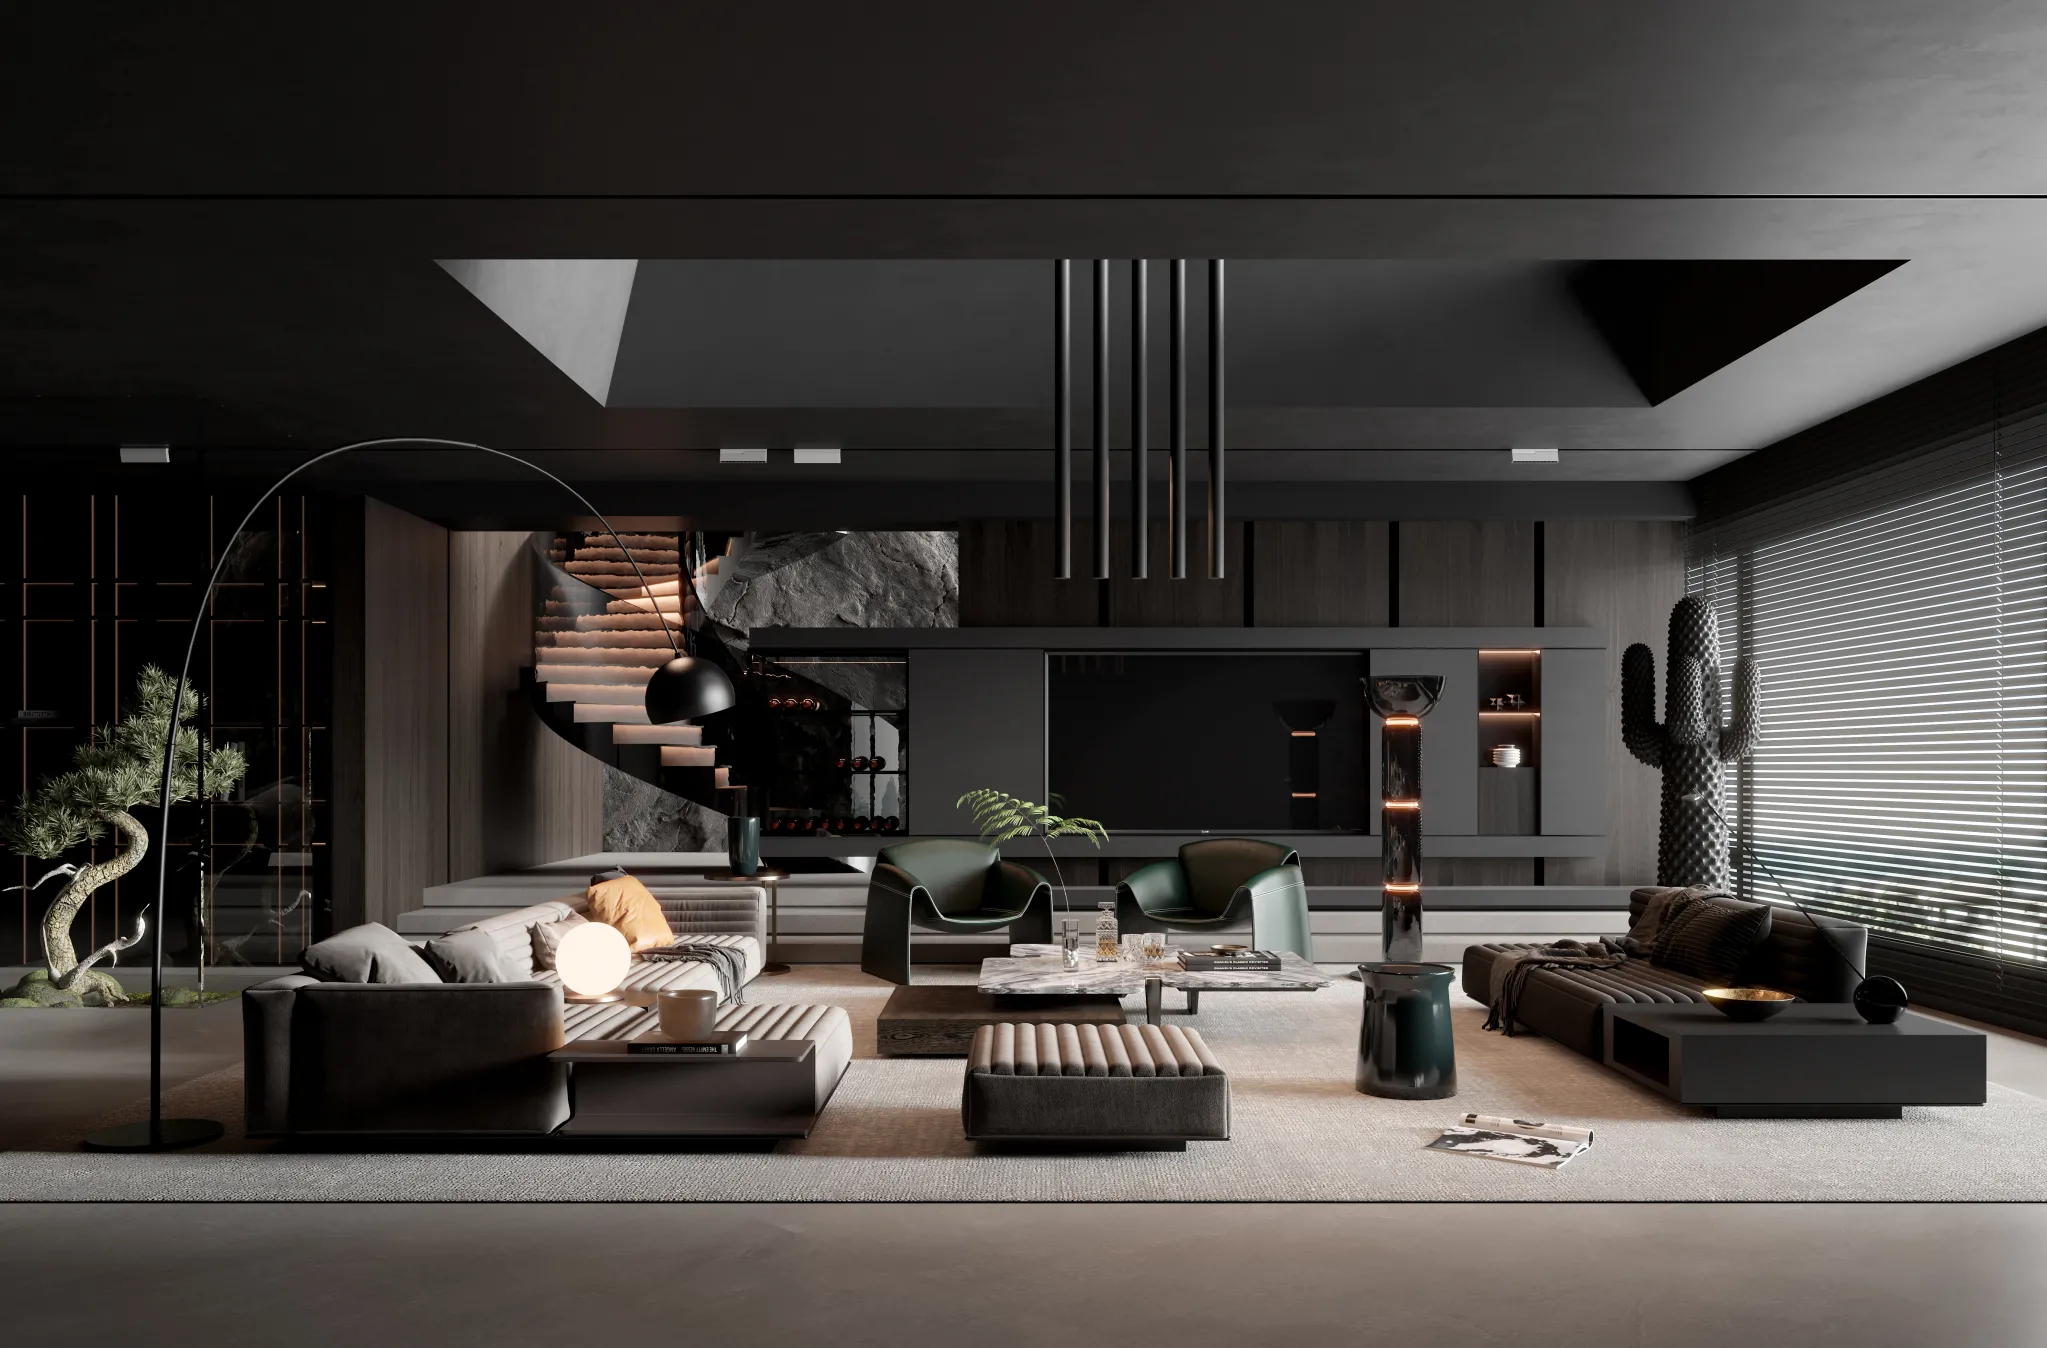 HOUSE SPACE 3D SCENES – LIVING ROOM – 0191